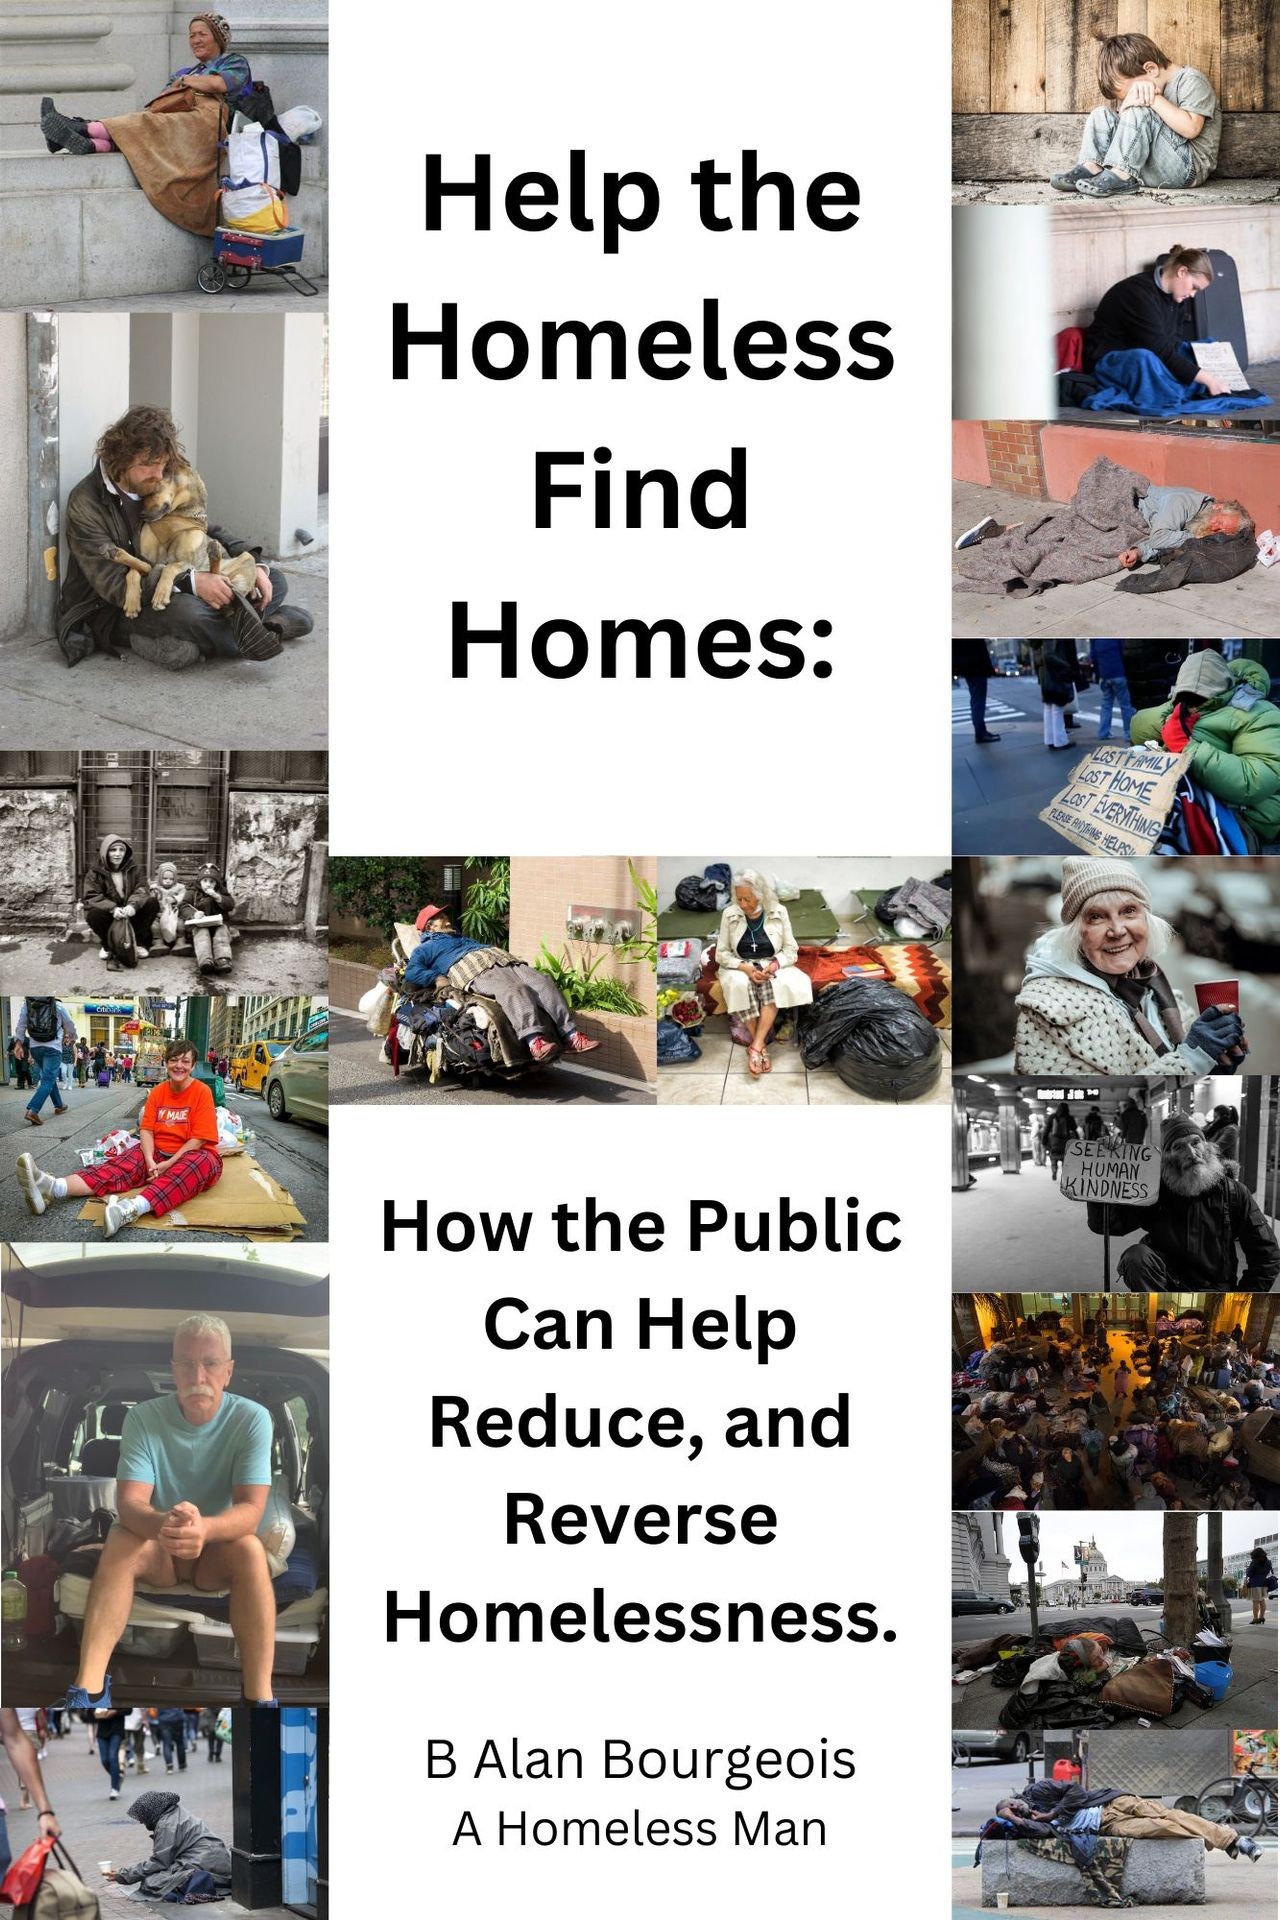 Help the Homeless Find Homes